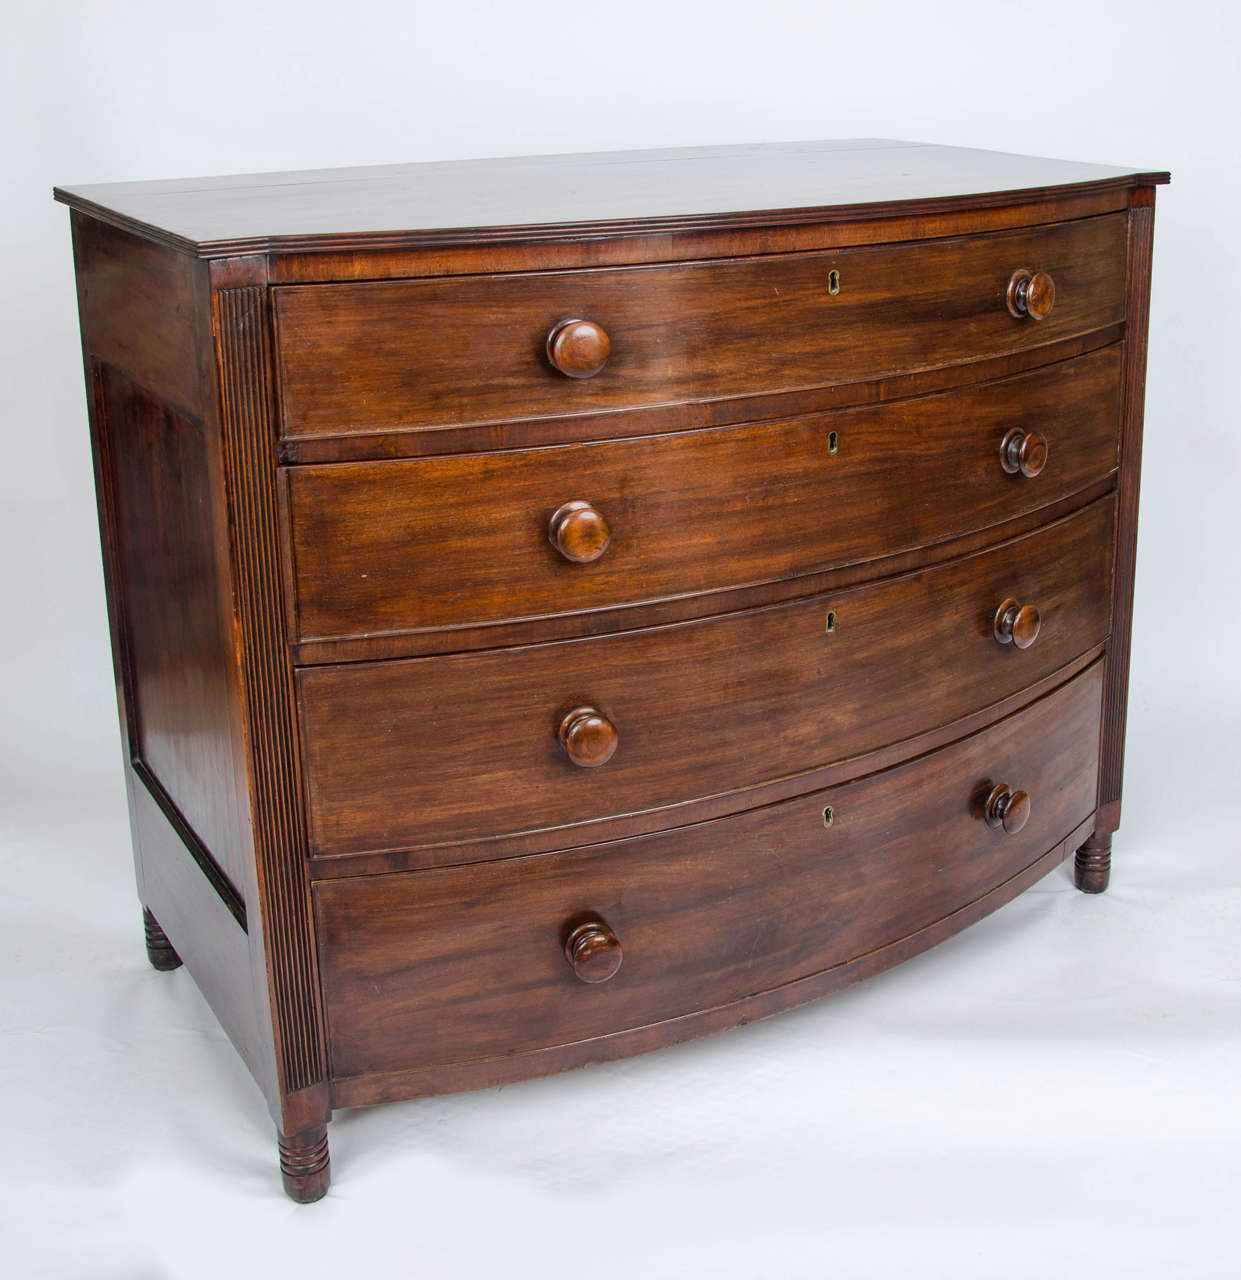 This is a fine Regency, late Georgian period, chest of drawers, with many quality features.

The chest is bow fronted with inset panelled sides, all made of a hardwood, possibly red walnut. The sides of the front are vertically reeded with further